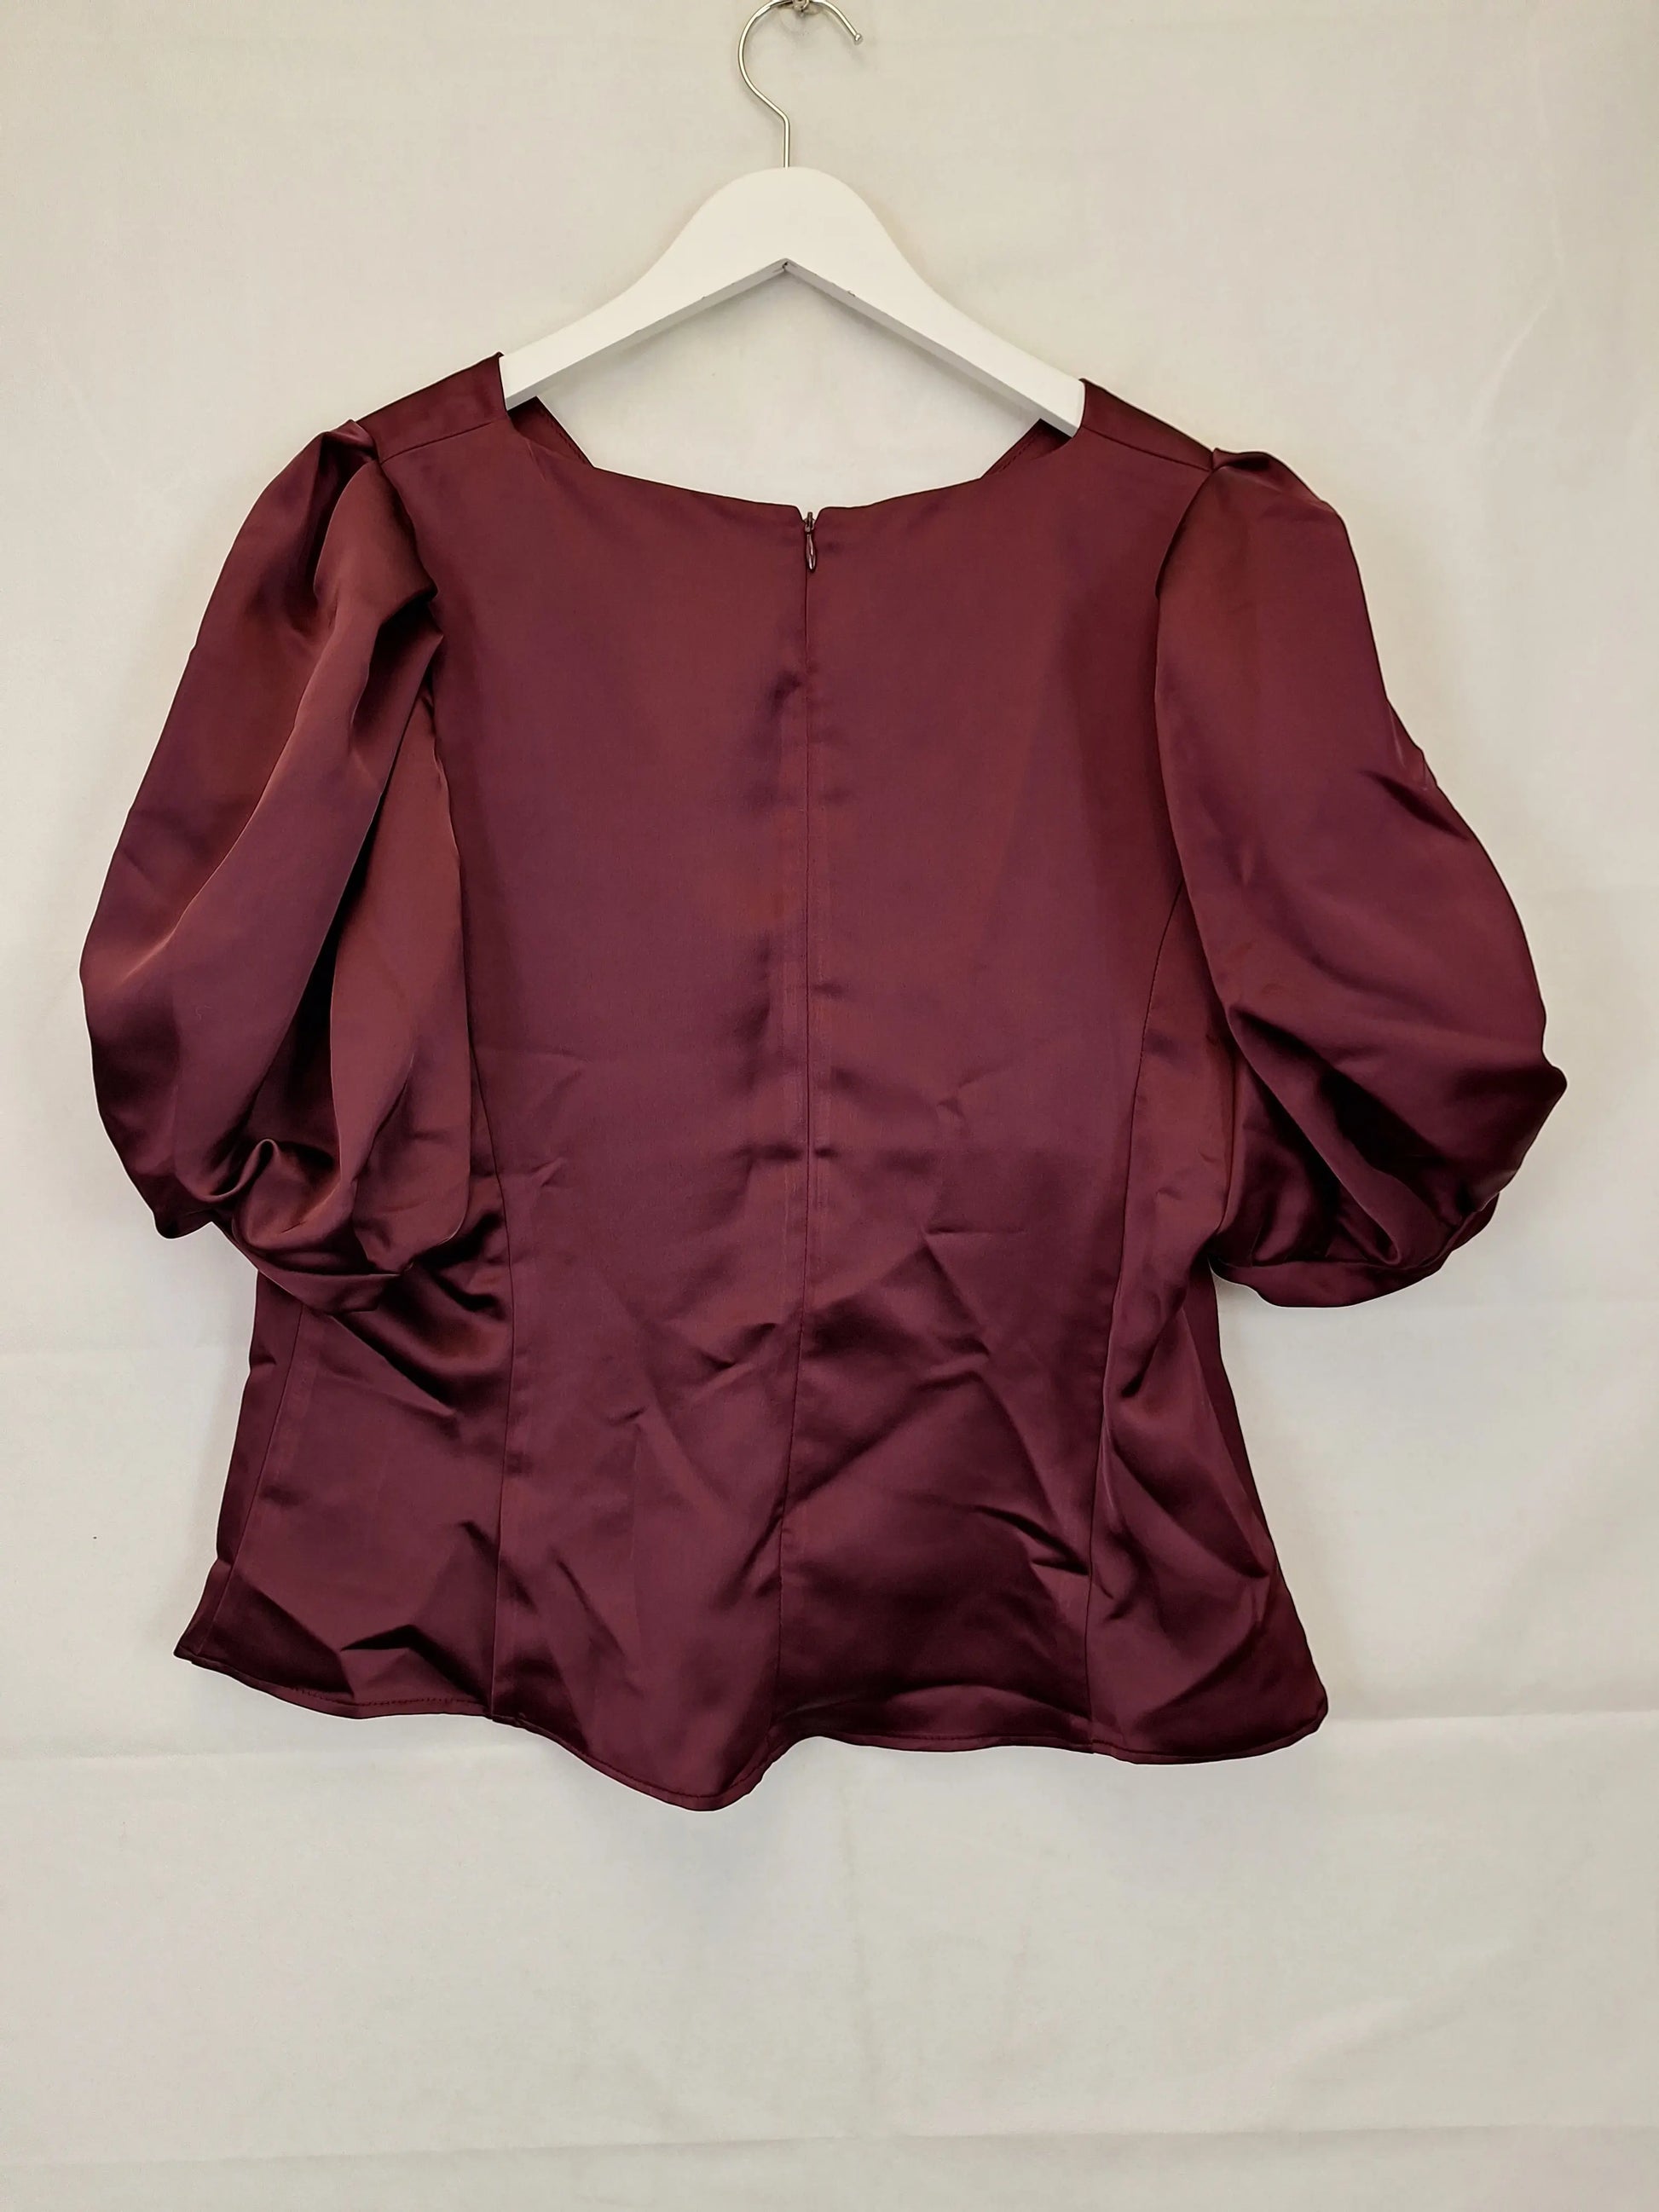 Veronika Maine Merlot  Puff Sleeve Shiny Party Top Size 16 by SwapUp-Online Second Hand Store-Online Thrift Store